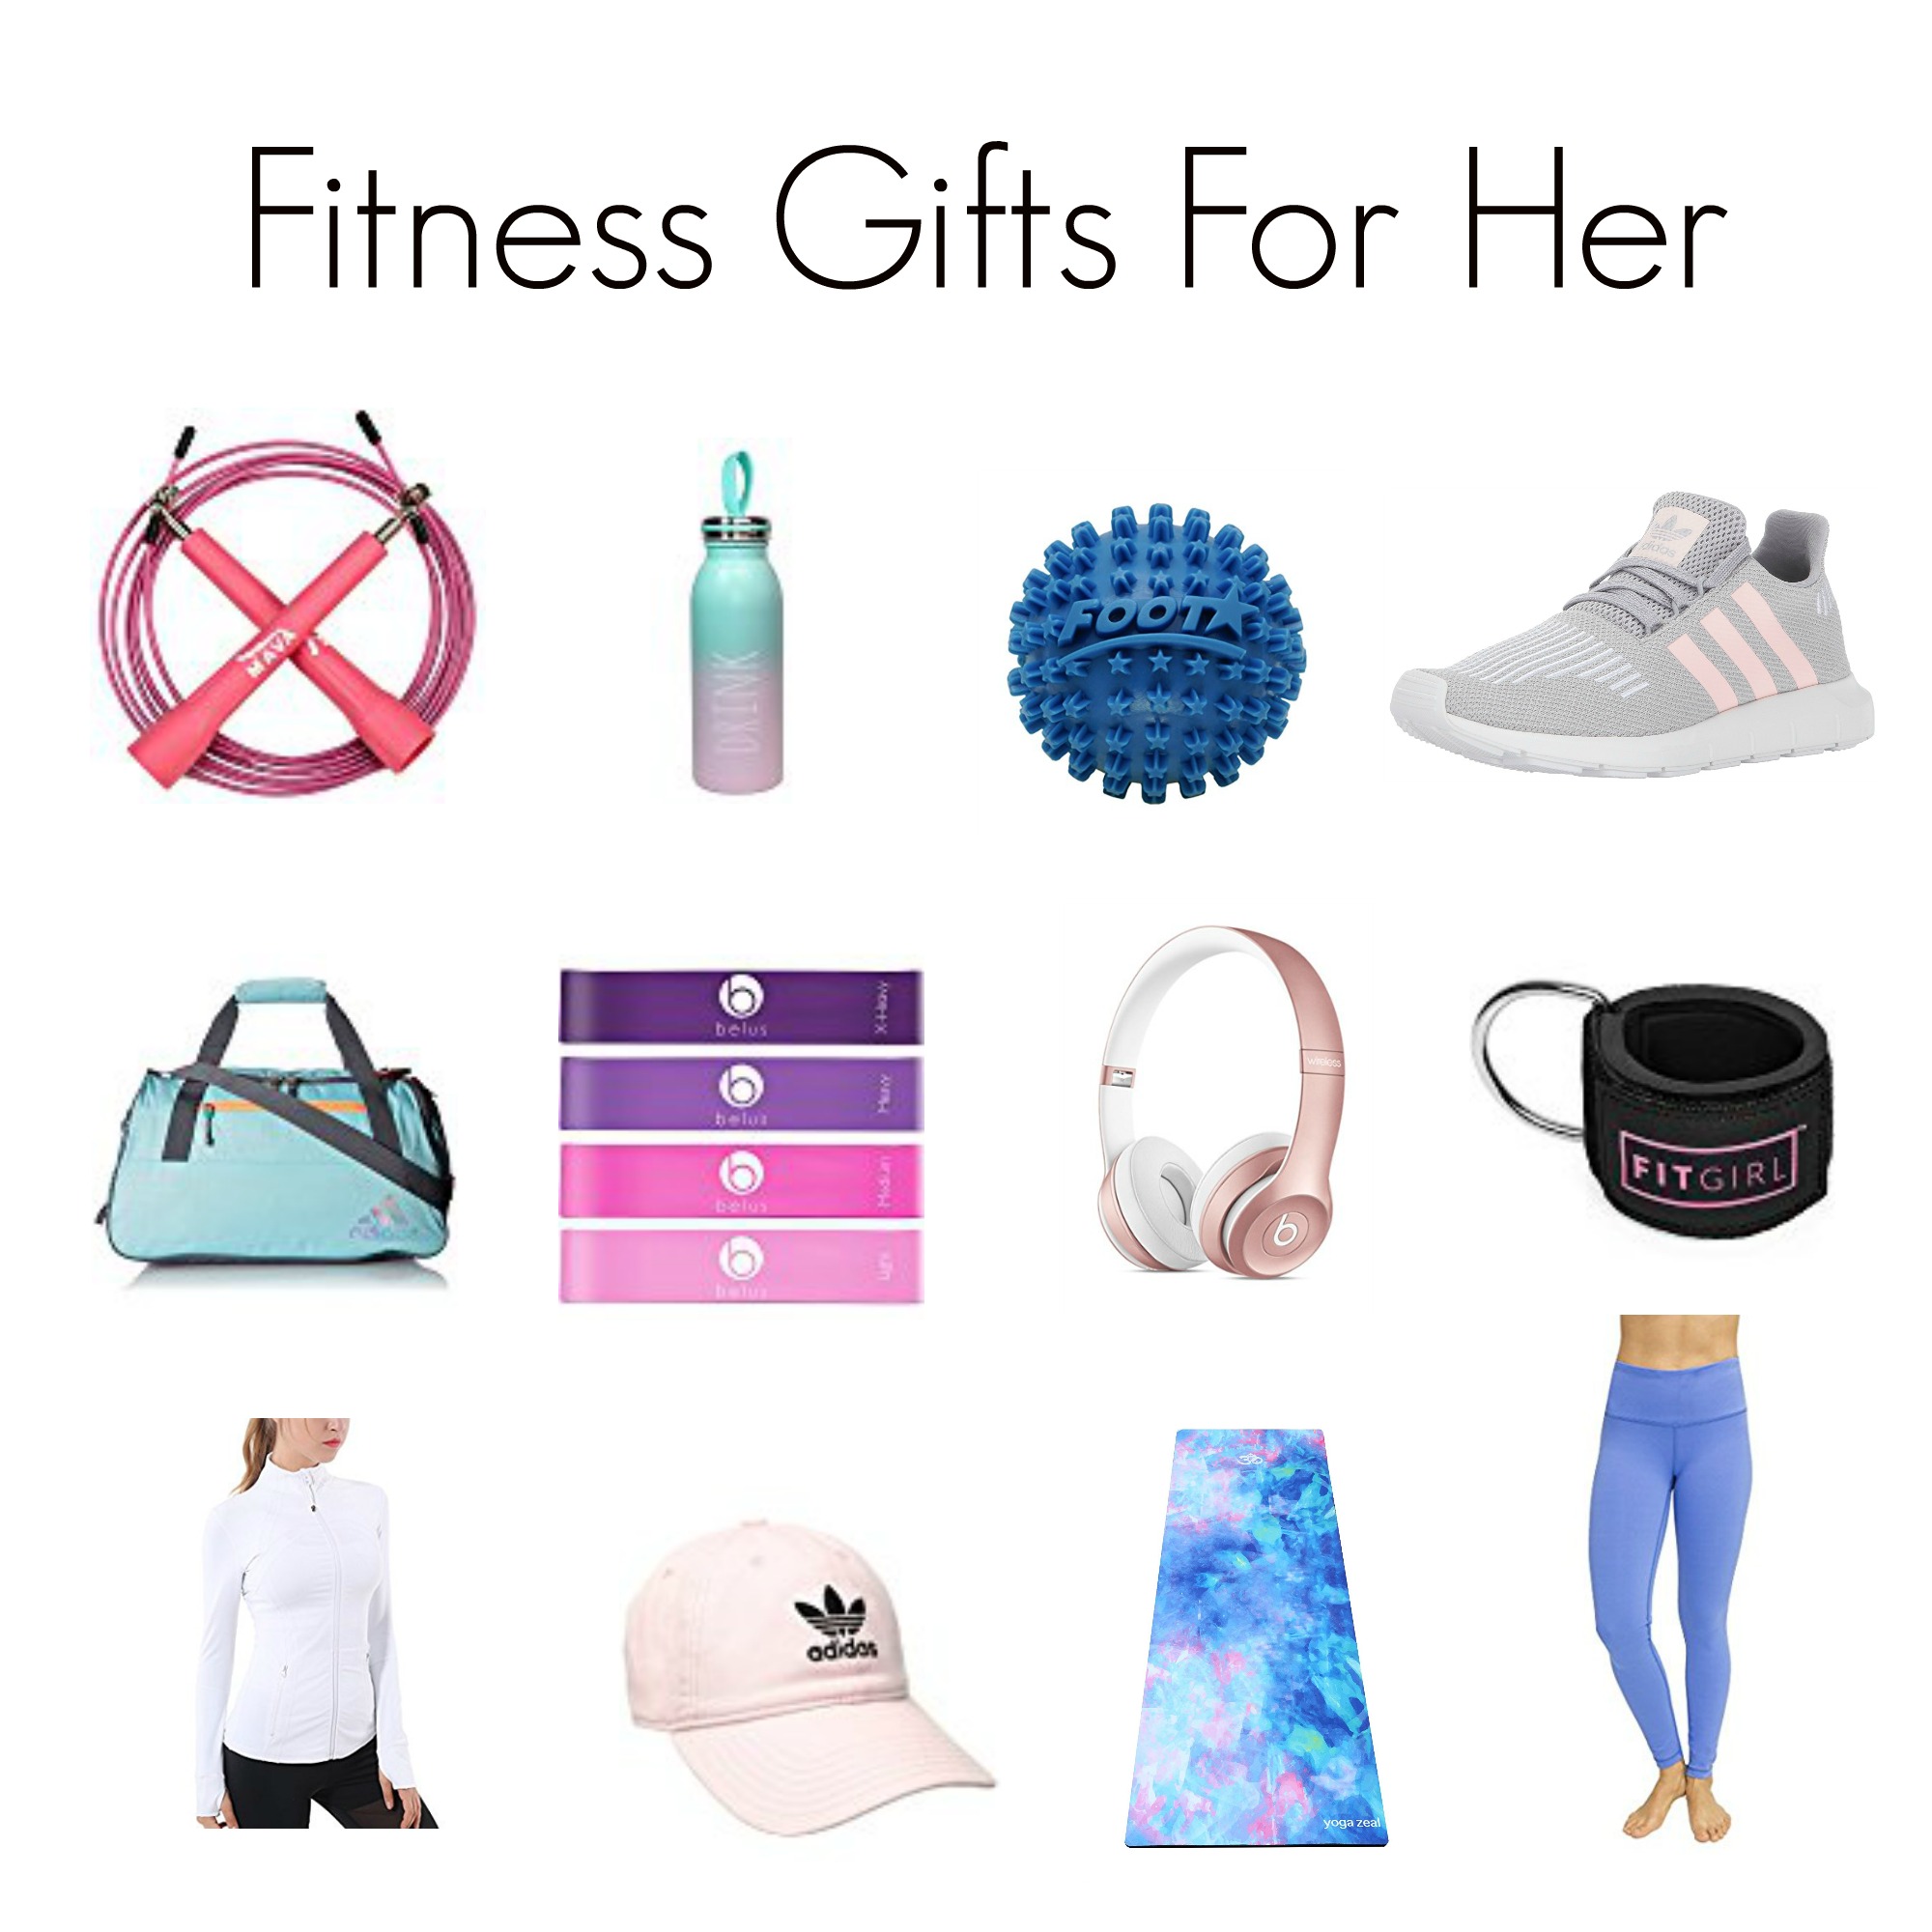 Fitness Gifts For Her - The Clever Side